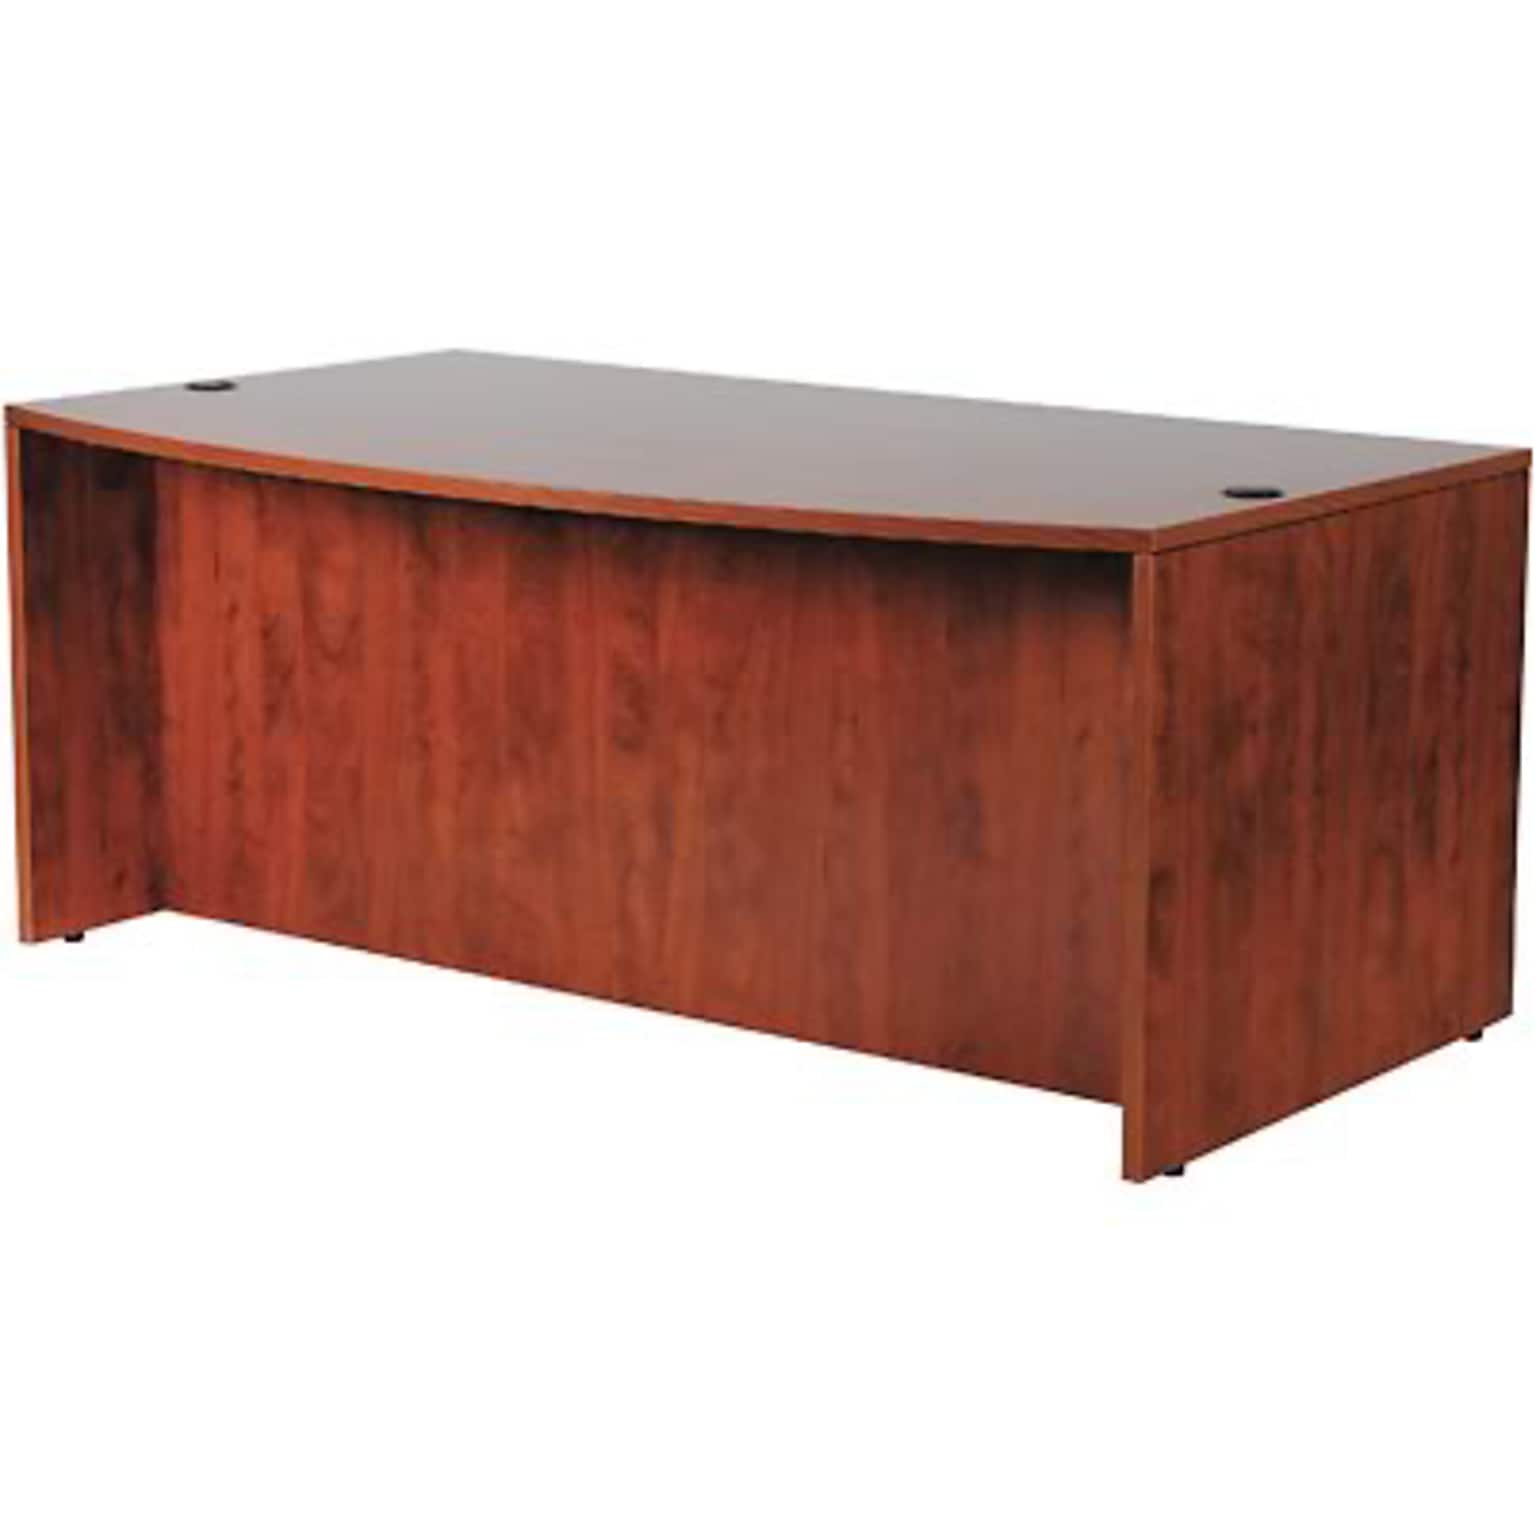 Boss® Laminate Collection in Cherry Finish; Bow Front Desk Shell